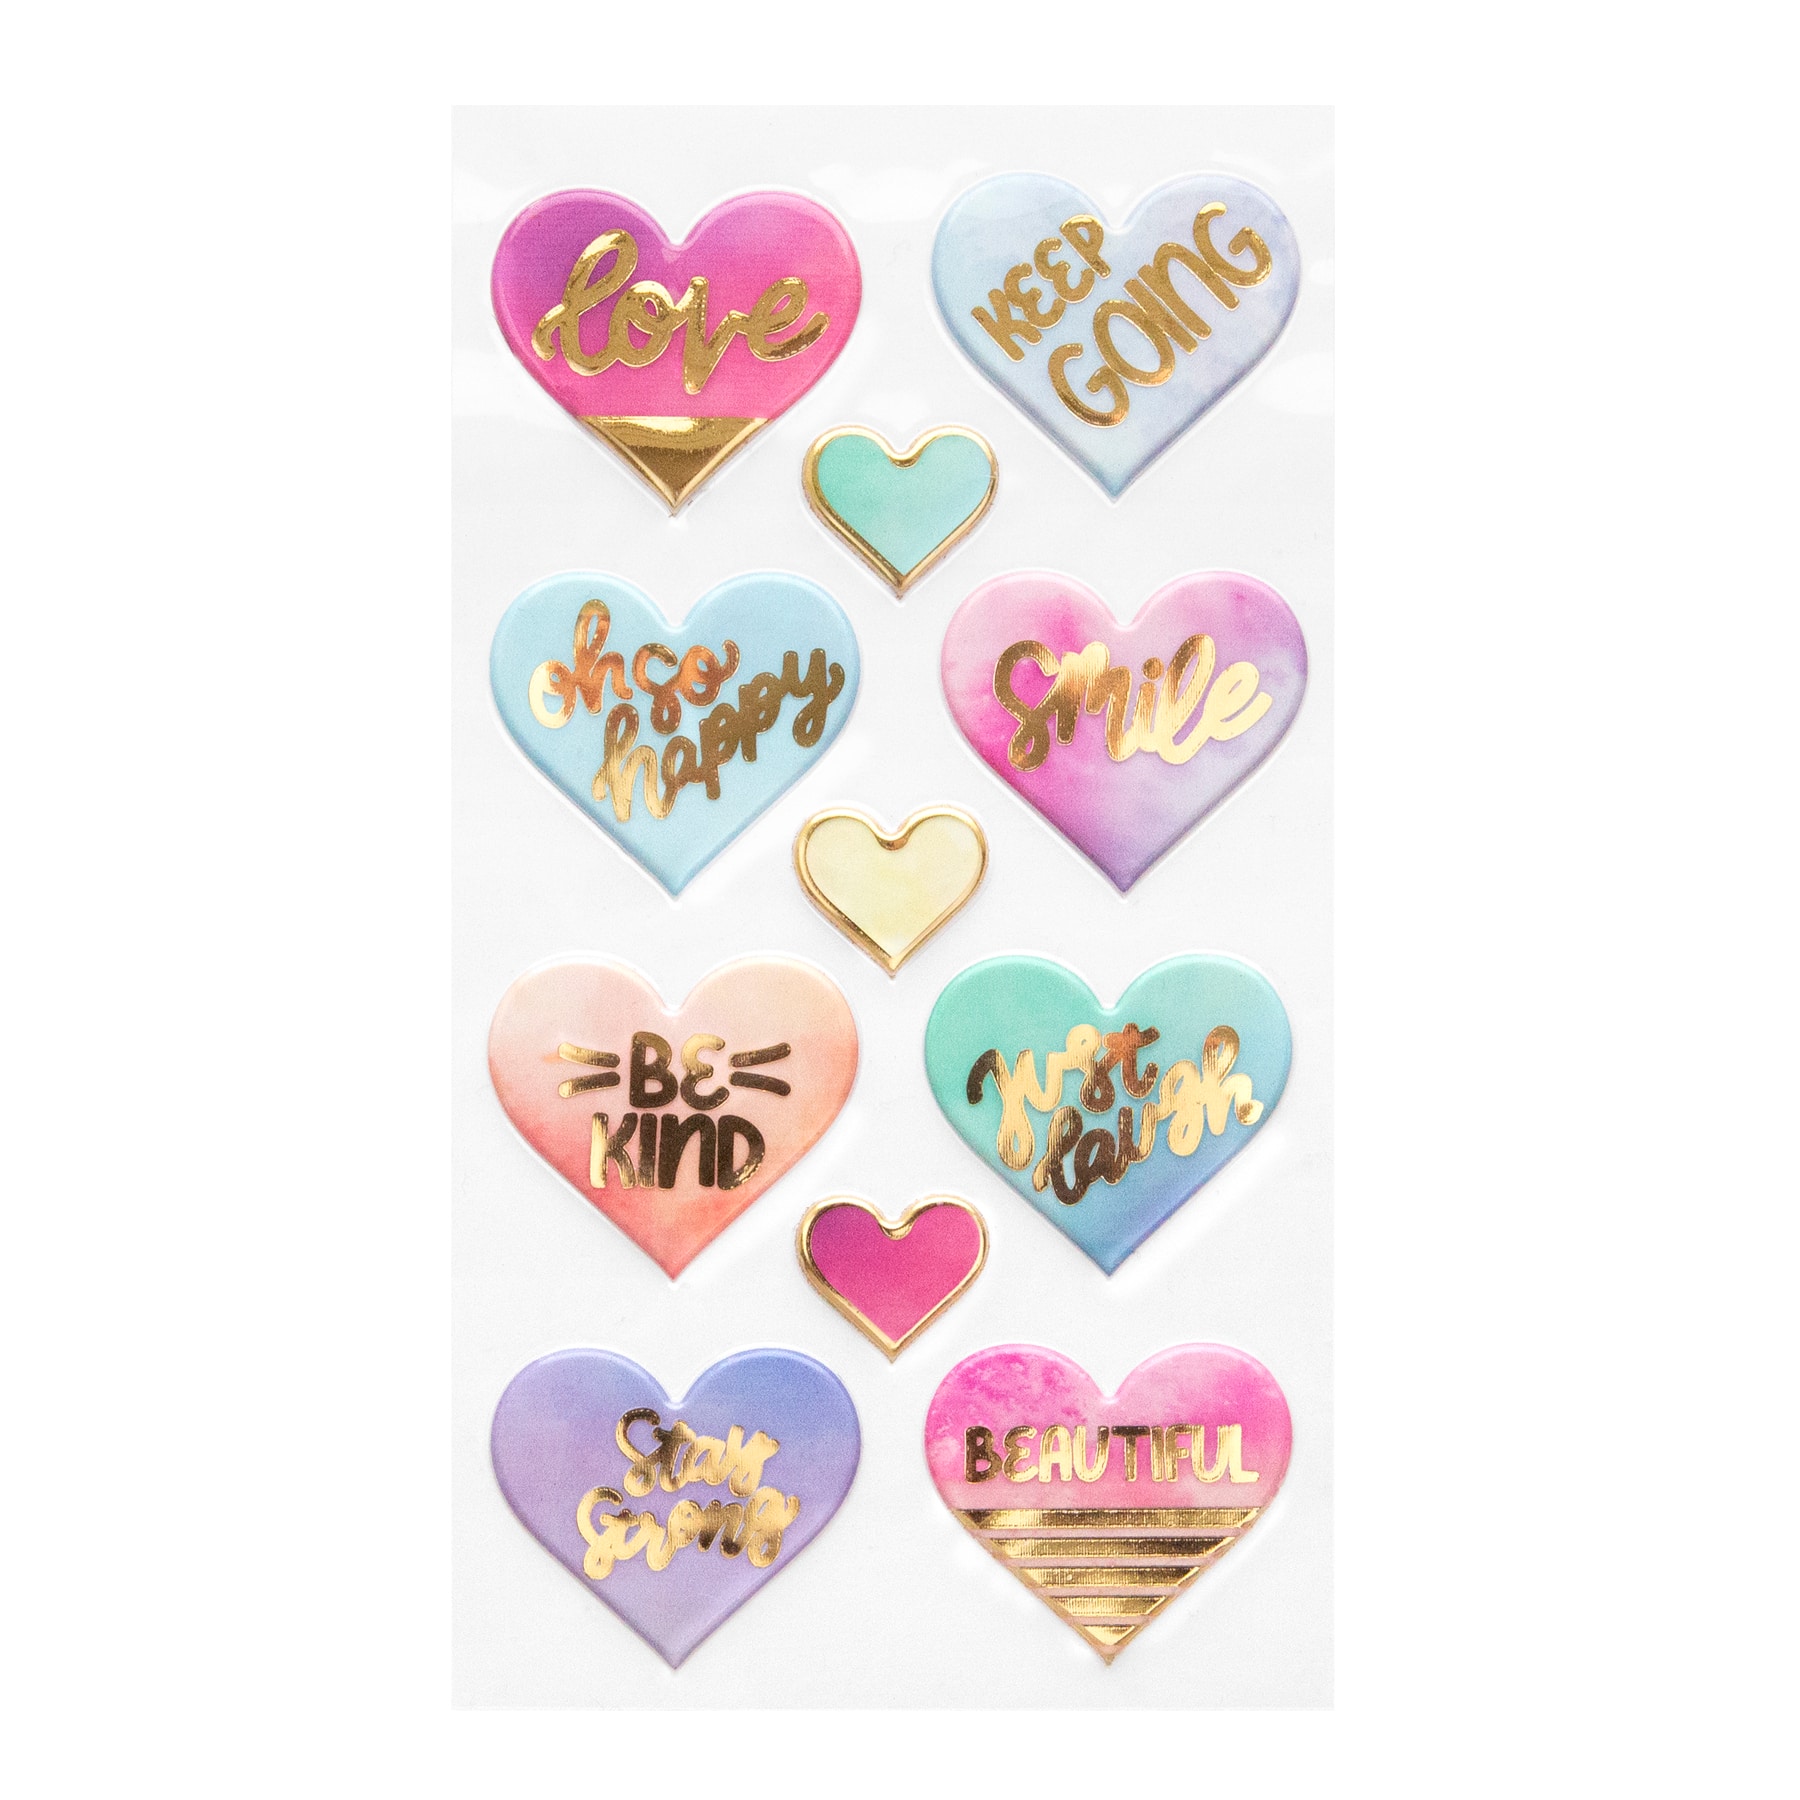 Recollections Puffy Watercolor Hearts Stickers - Each